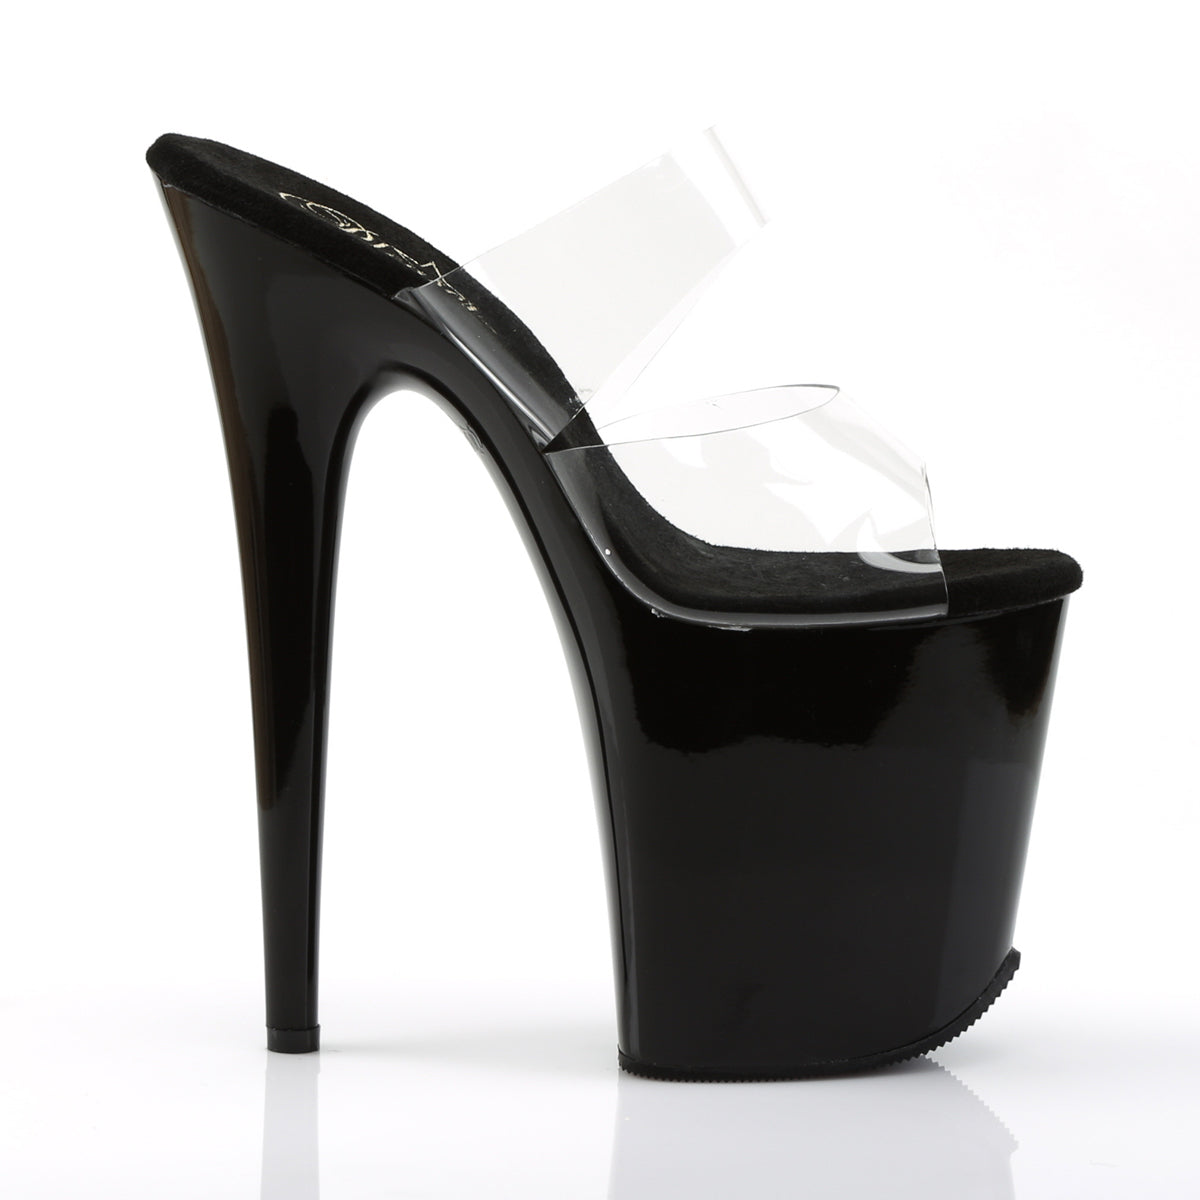 FLAMINGO-802 8" Heel Clear and Black Pole Dancing Platforms-Pleaser- Sexy Shoes Fetish Heels